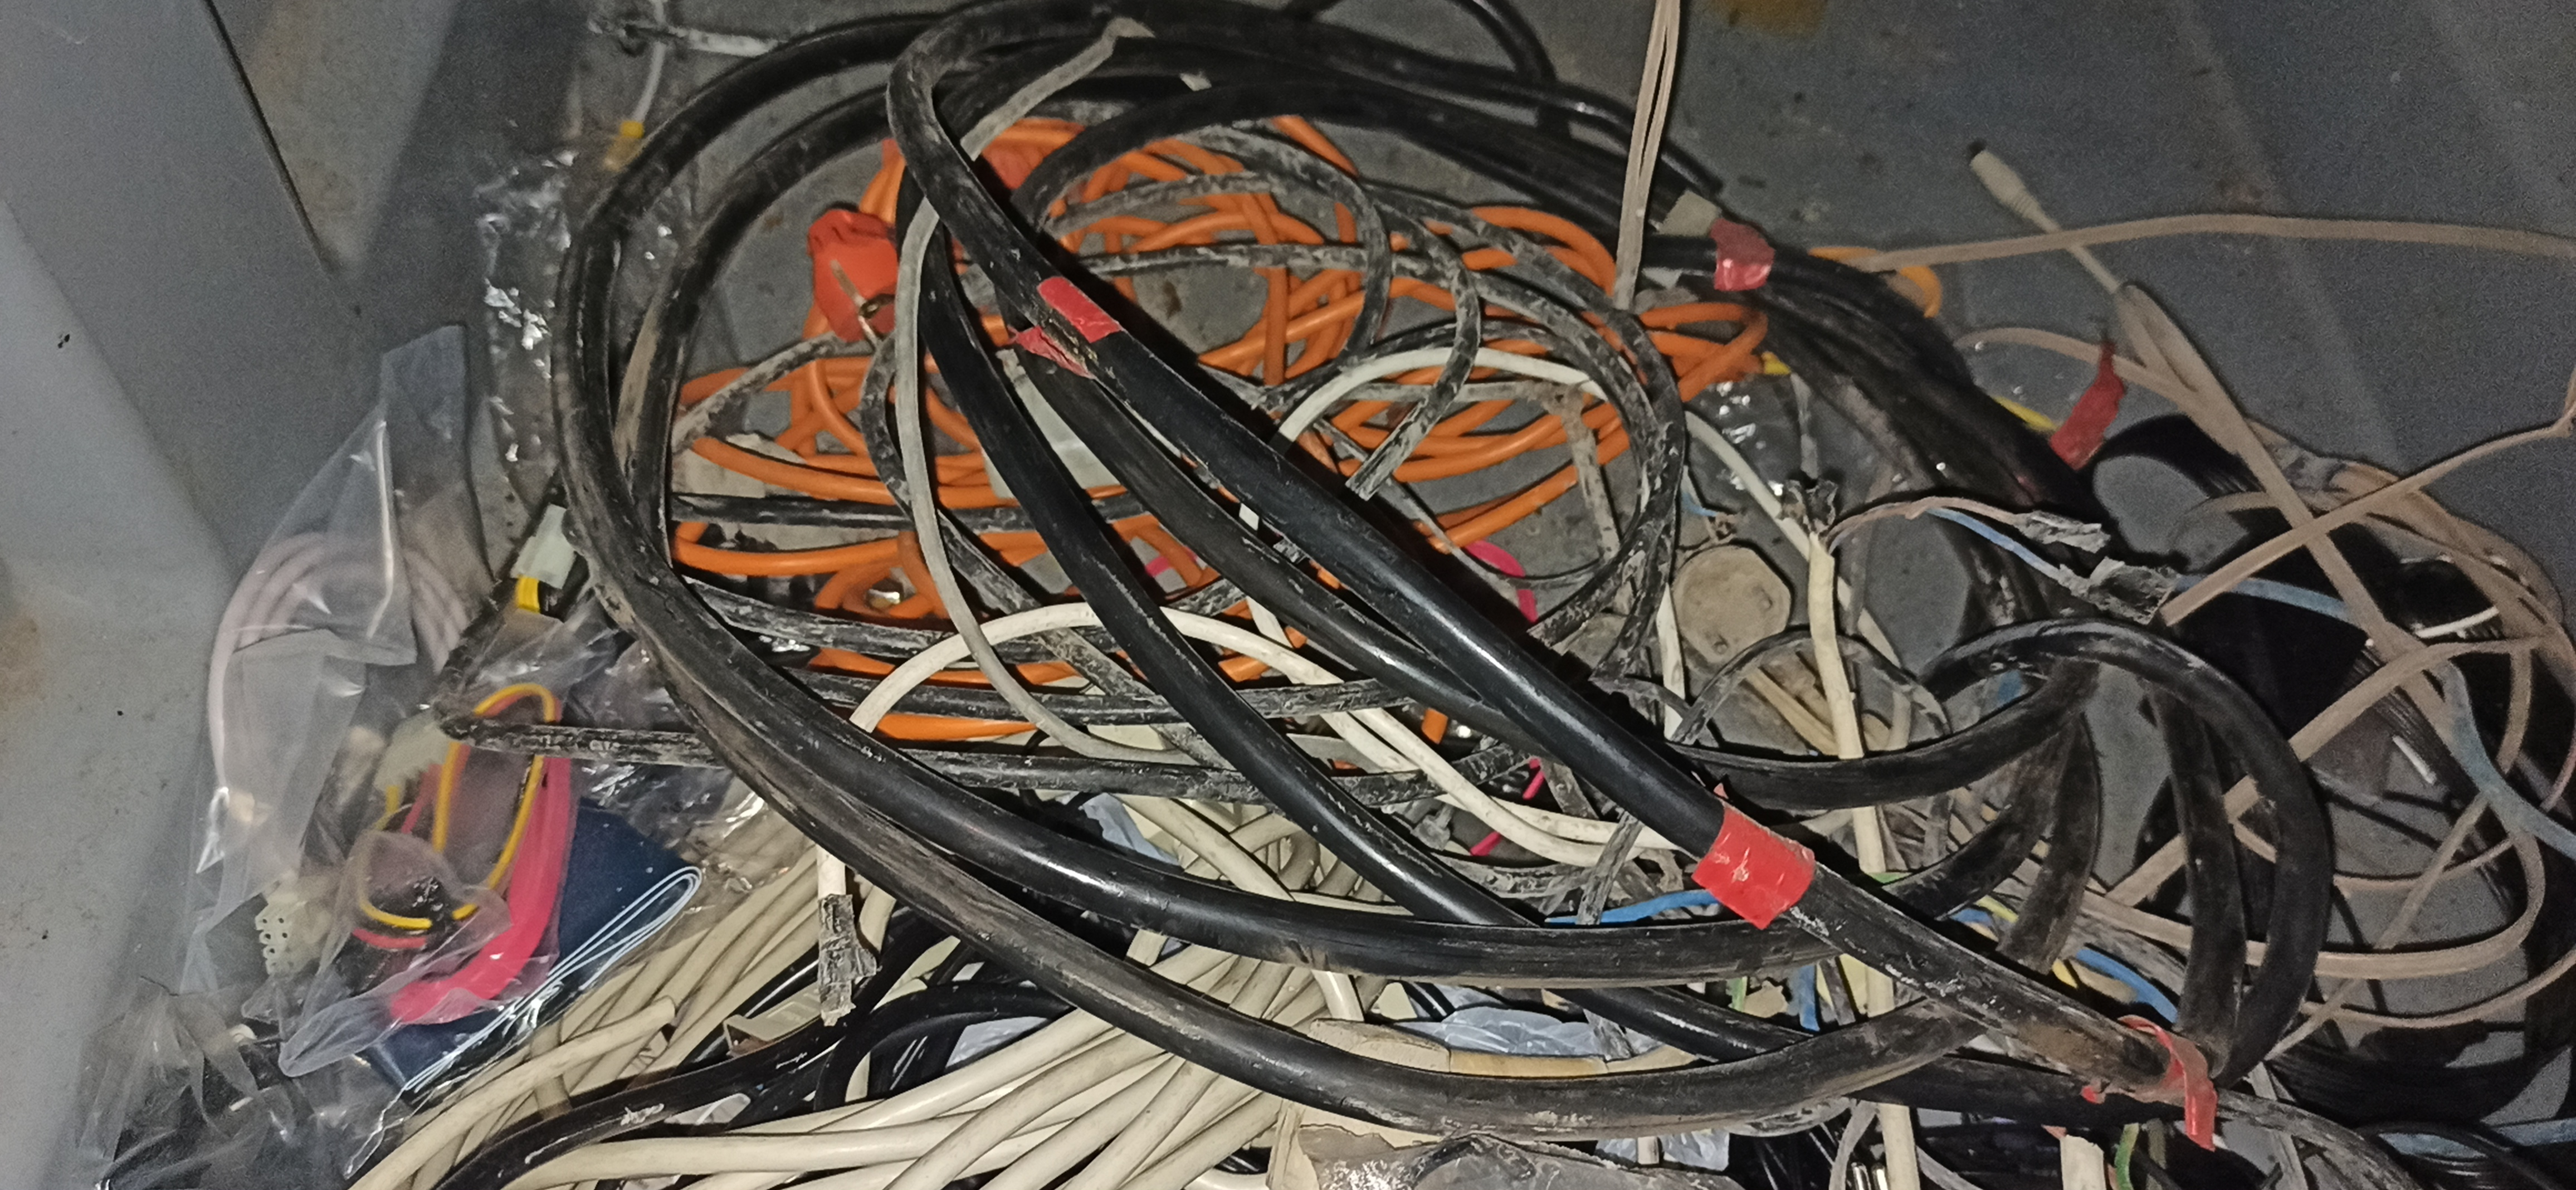 Discarded electronics - electronic cable waste